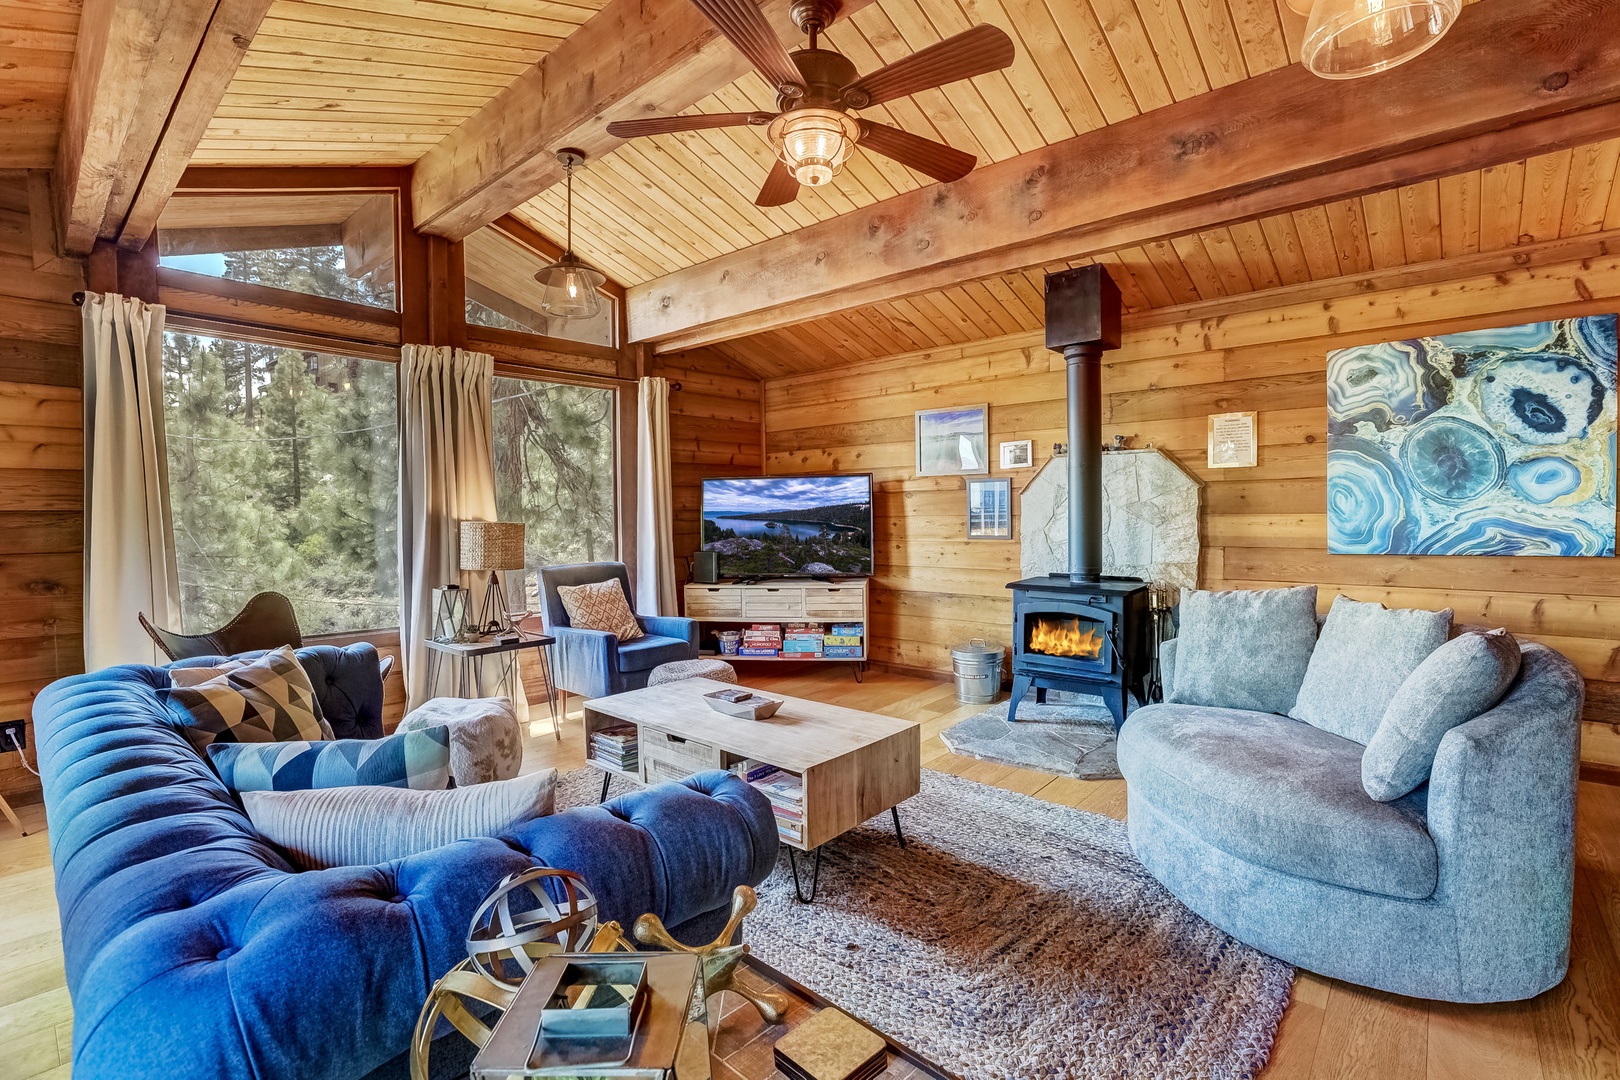 Living room with 55” Smart TV, wood burning stove, and balcony access